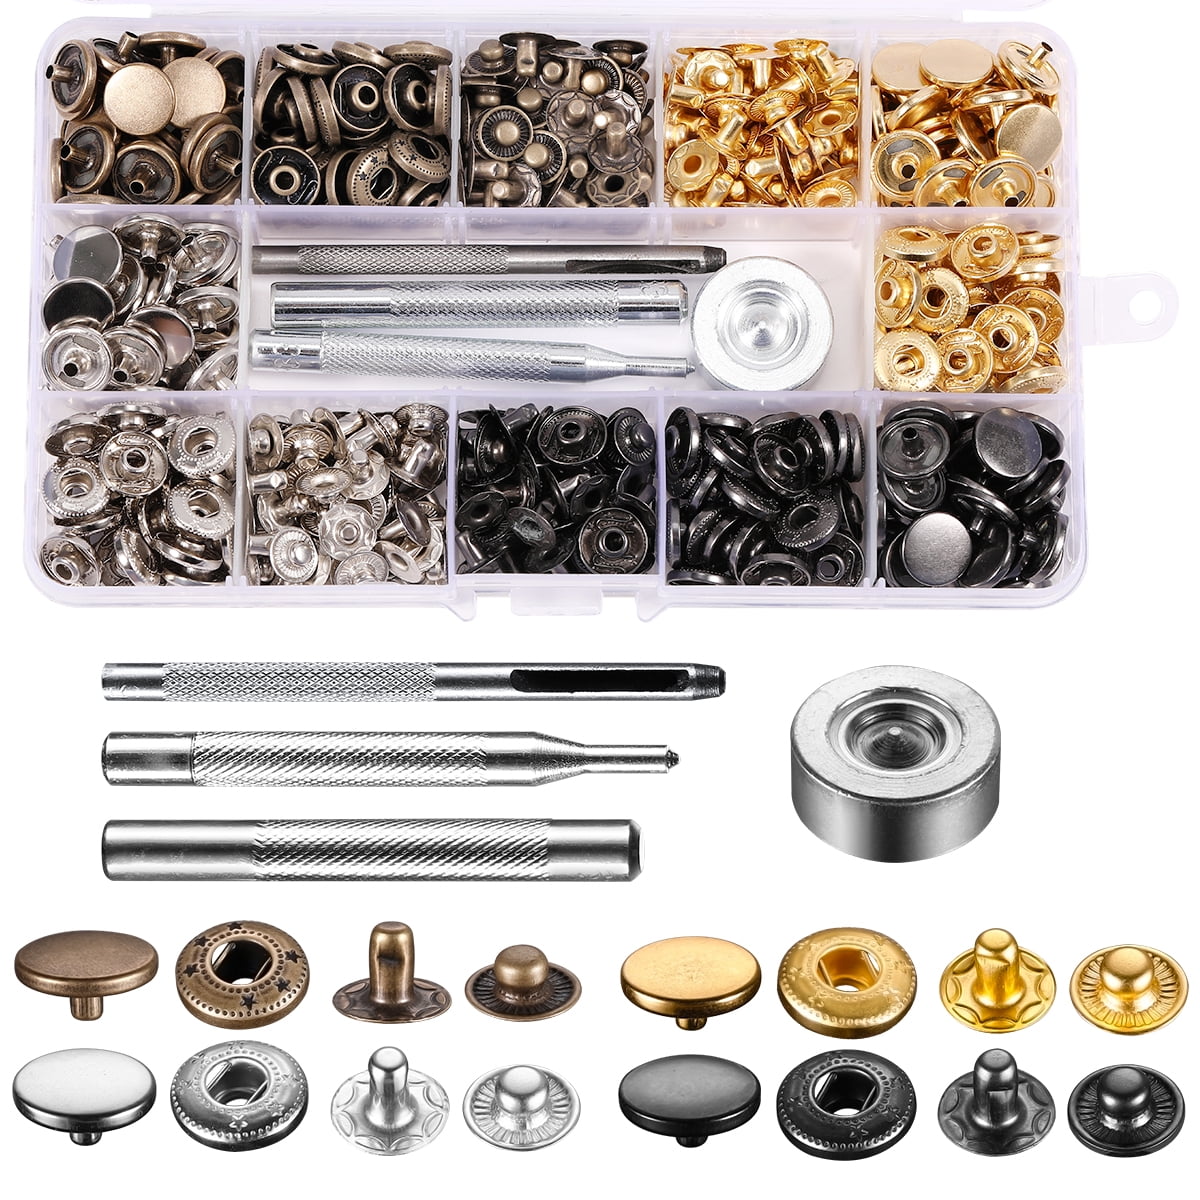 Leather Snap Fasteners Kit, 120 Pcs Metal Button Snaps Press Studs with 2  Setter Tools, Leather Snaps for Clothes, Jackets, Jeans Wears, Bracelets,  Bags 